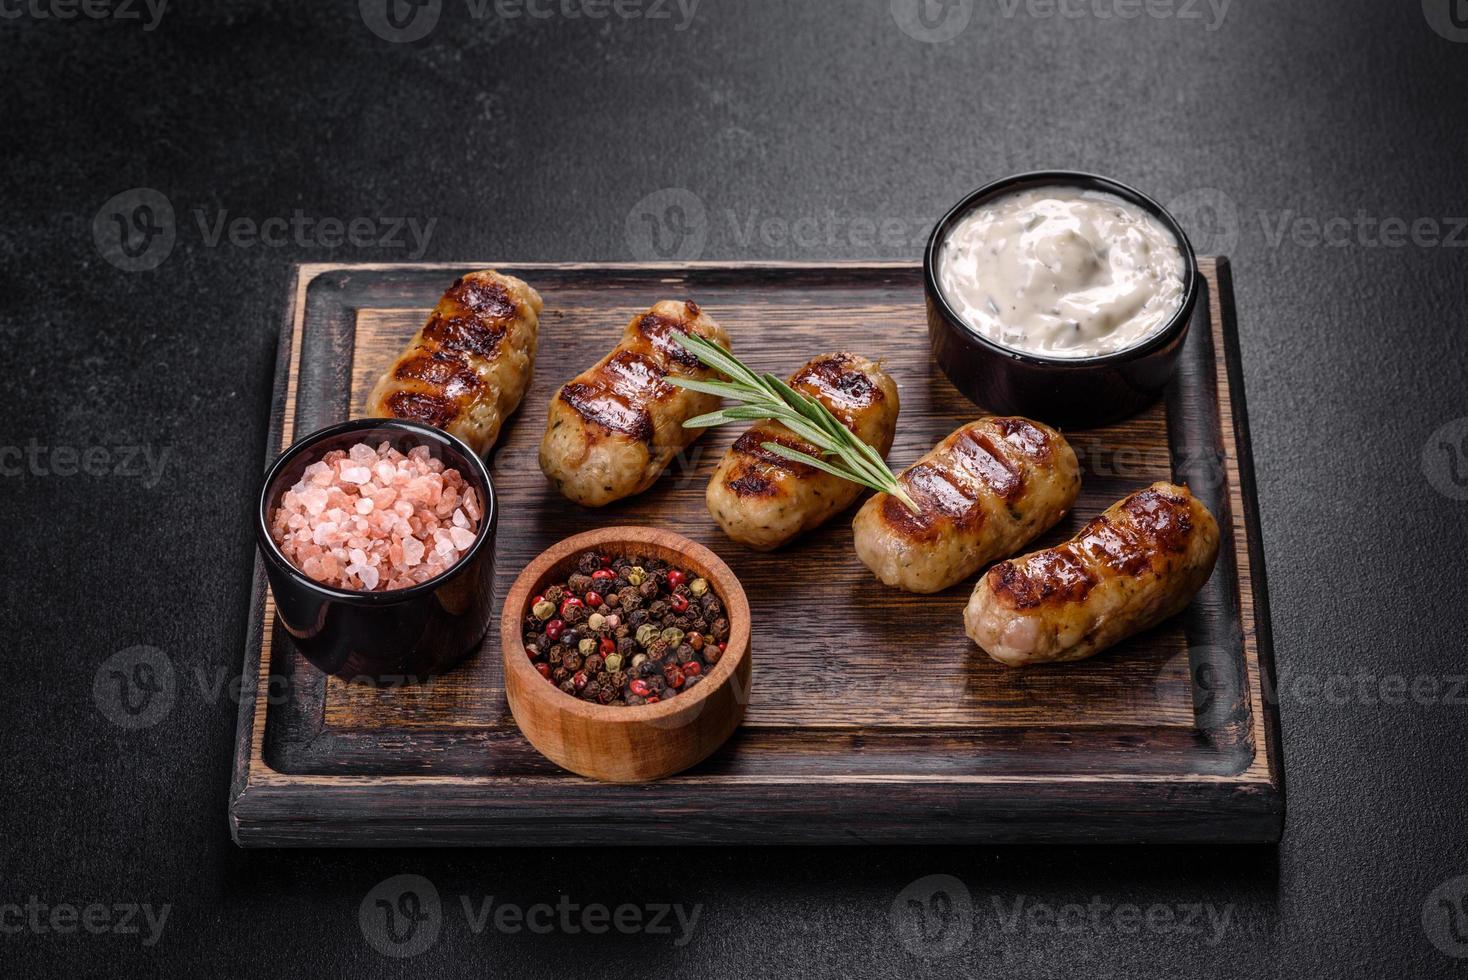 Grilled sausage with the addition of herbs and vegetables photo